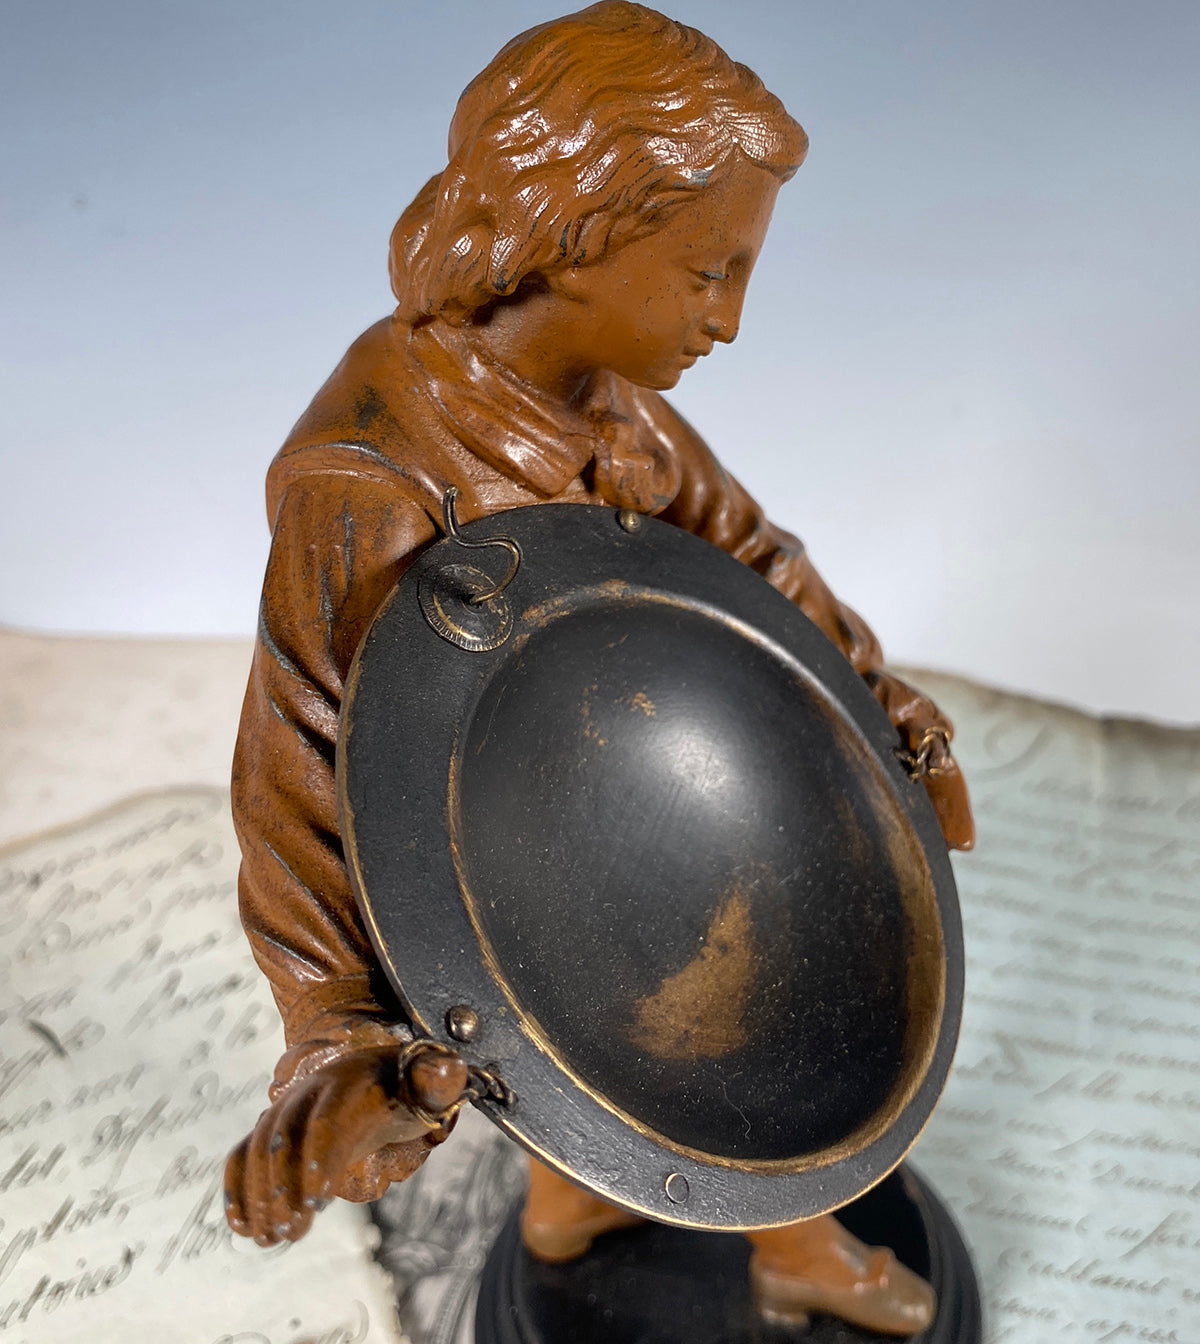 Vintage French Sculpture, A Boy with Disc or Bowl is a Pocket Watch Stand, Holder, Display